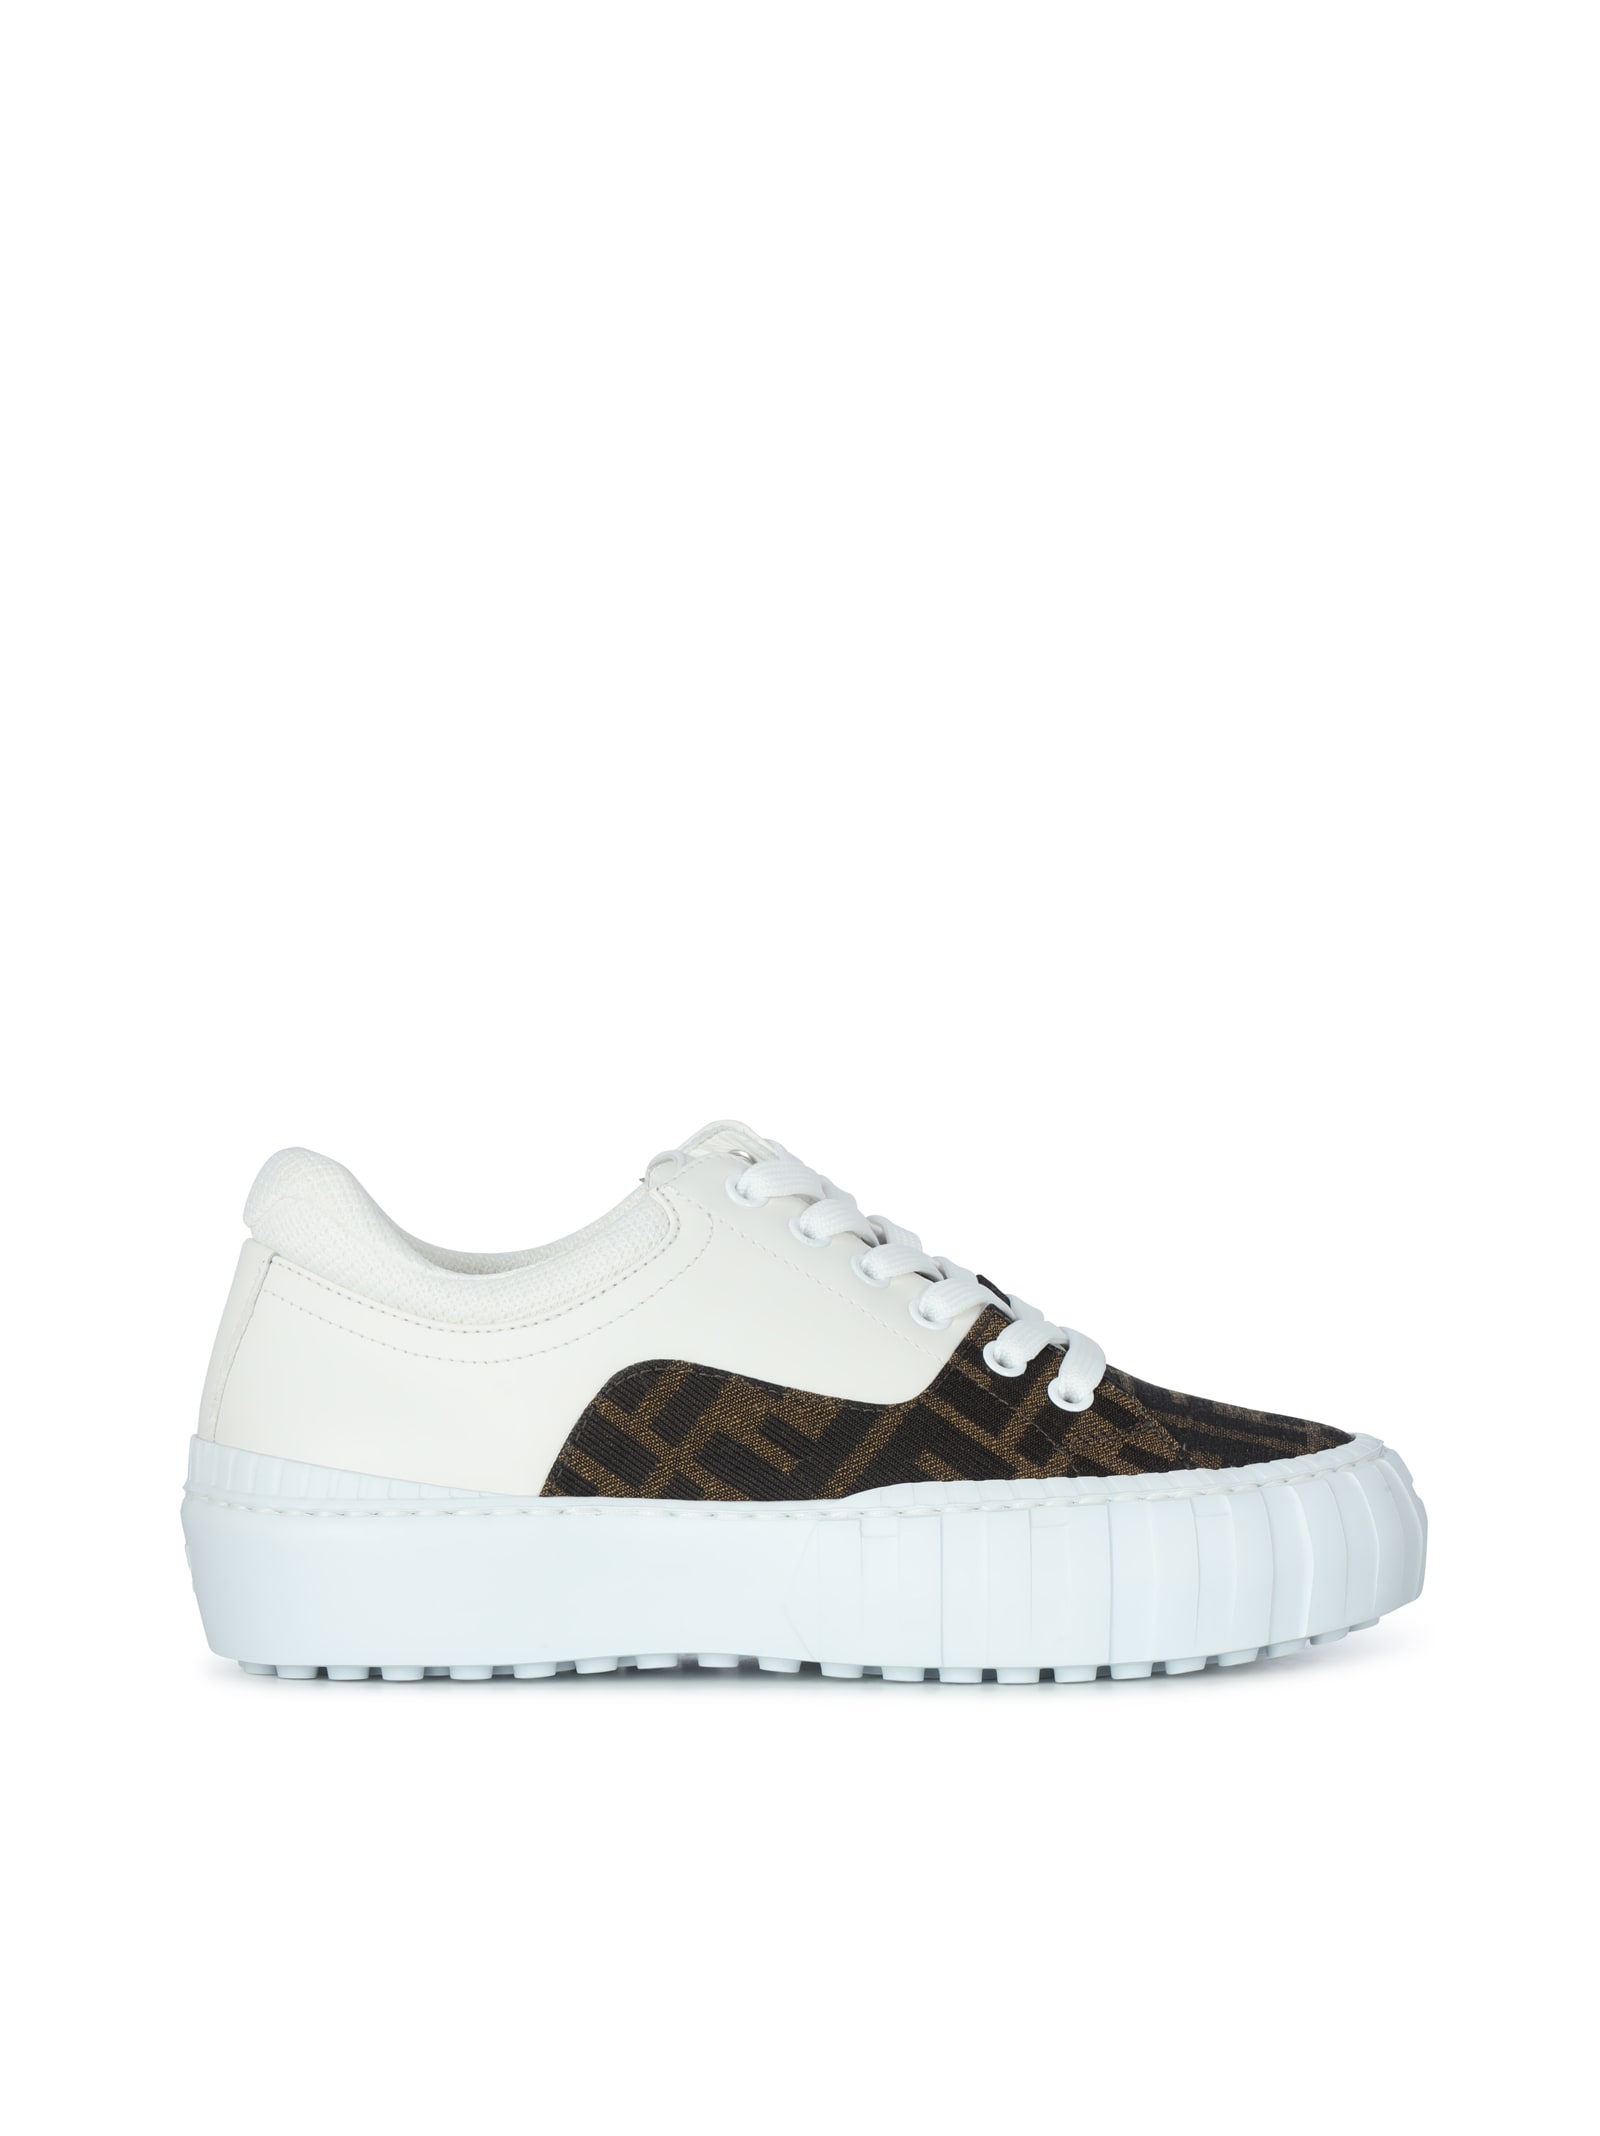 Fendi Leather And Technical Fabric Sneakers